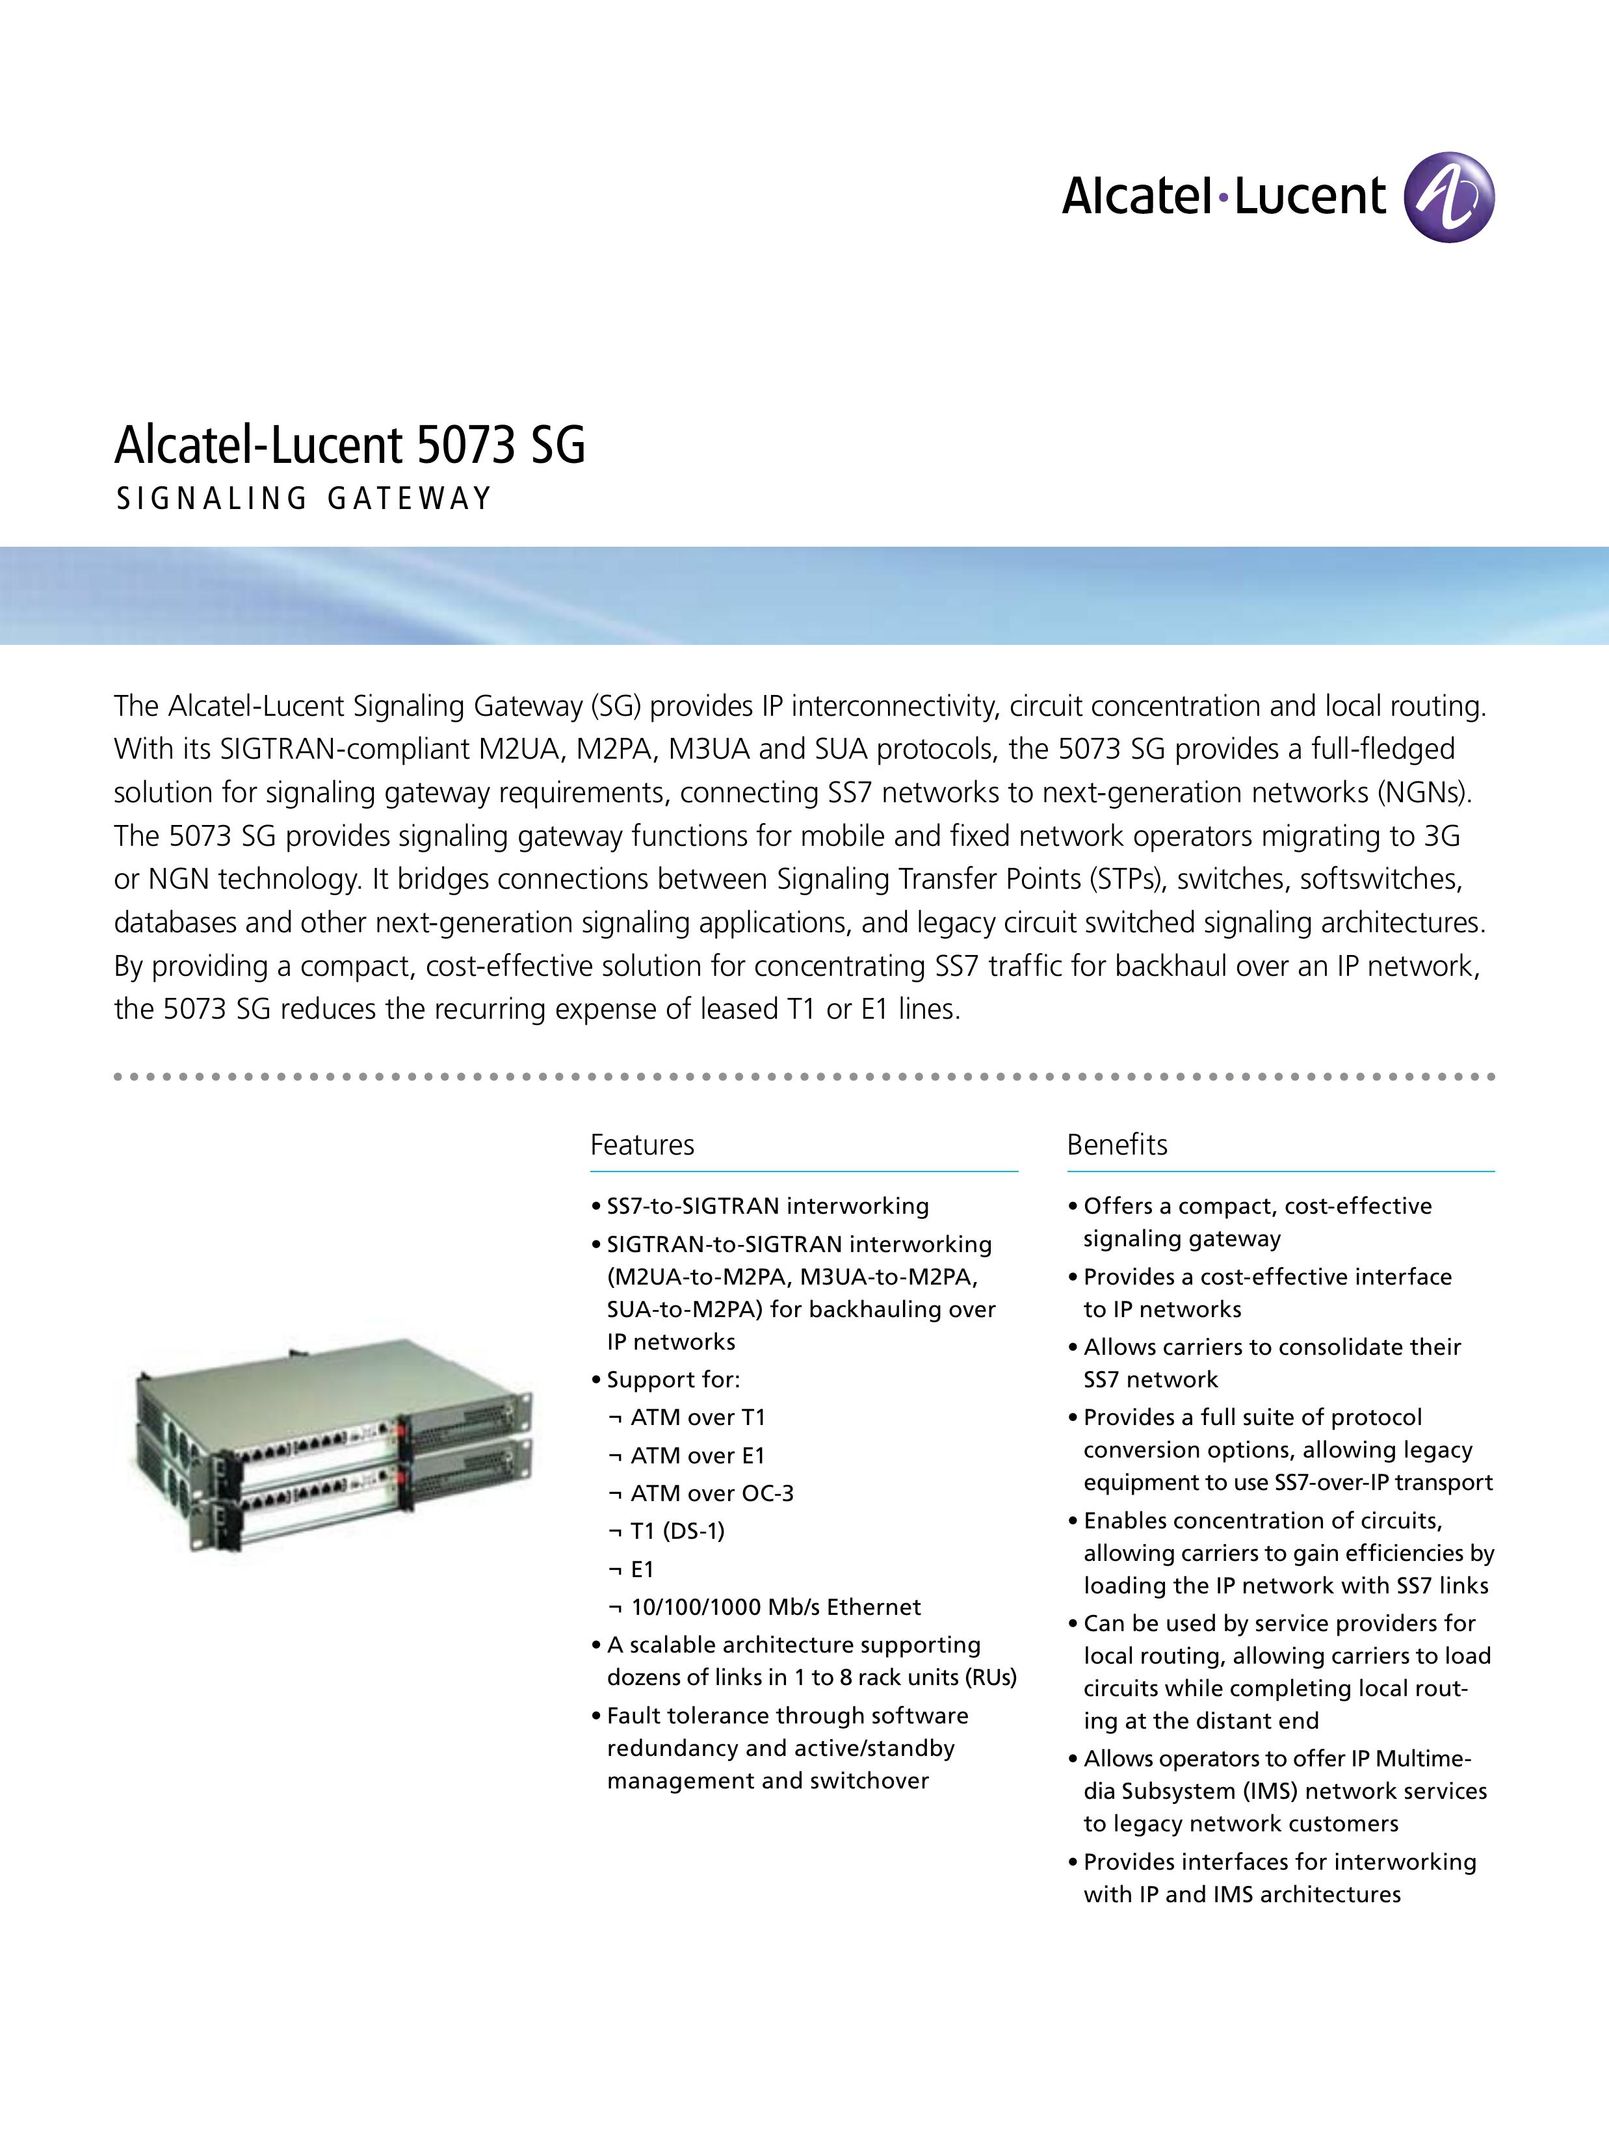 Alcatel-Lucent 5073 Network Card User Manual